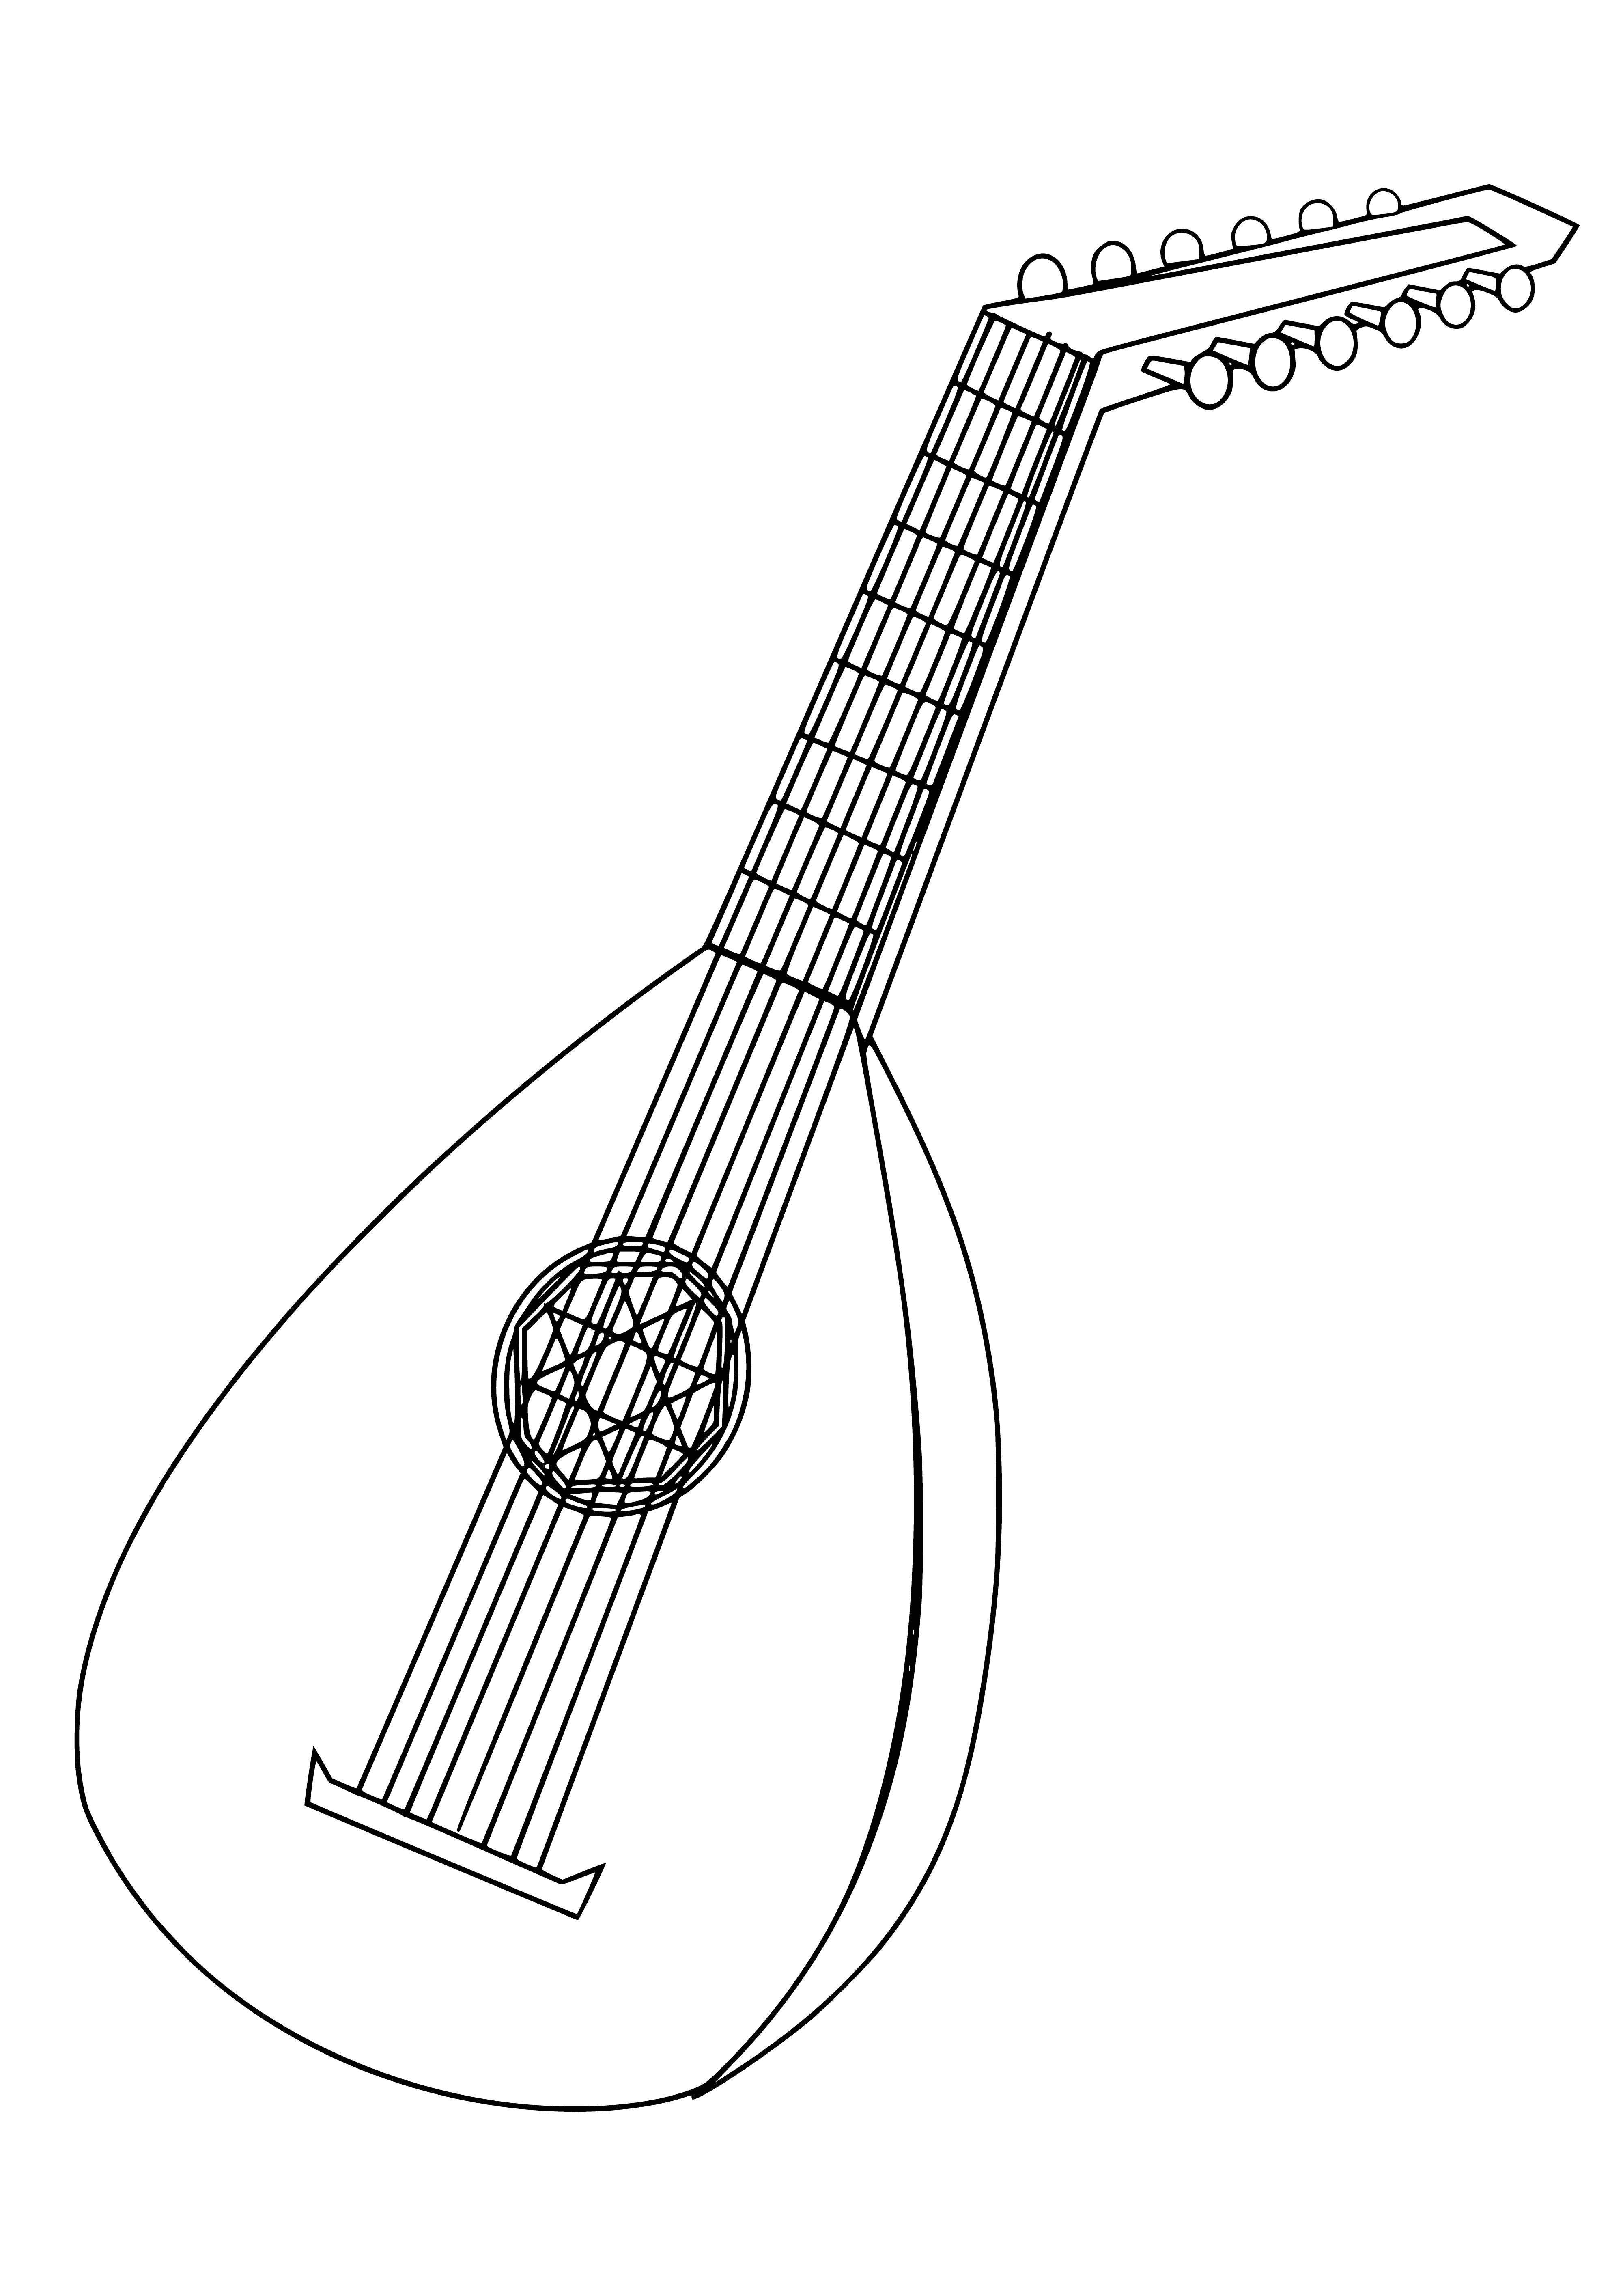 coloring page: Man plays string instrument on lap, plucking with right hand and holding object in left. Wears robe and hat.